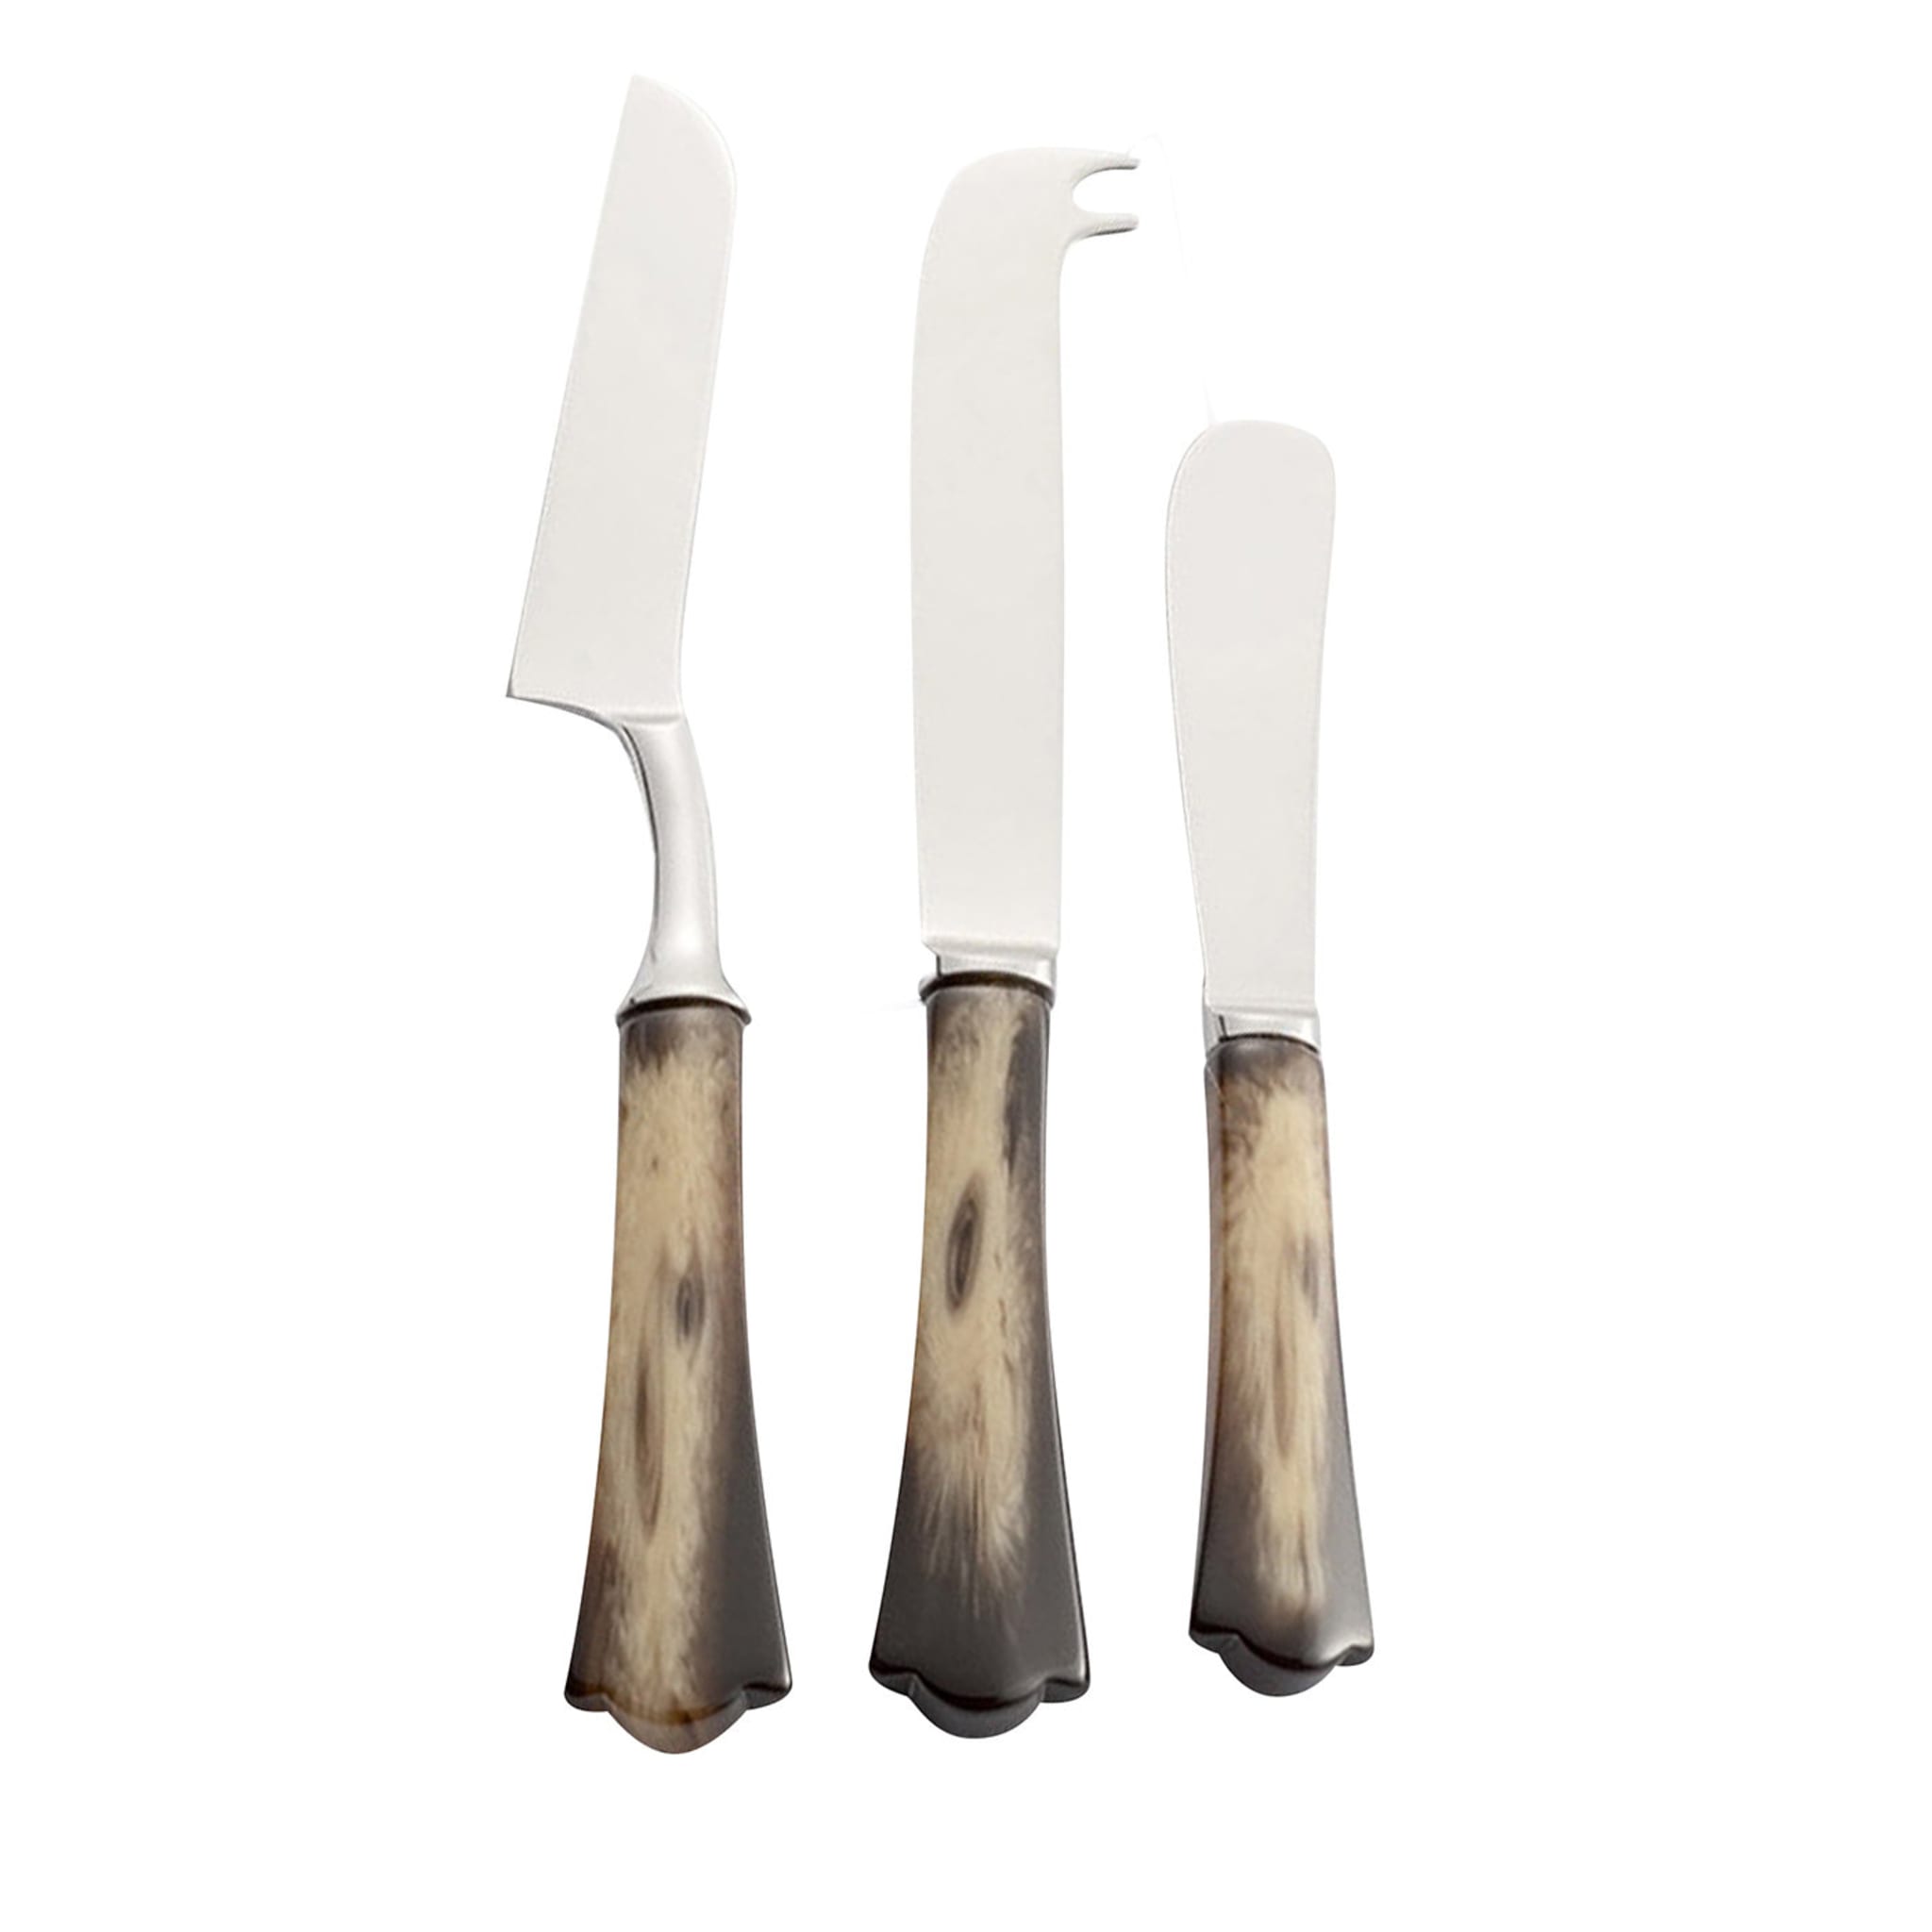 Coltellerie Berti Hand Forged Cheese Knives Boxed Set of 3 - Red